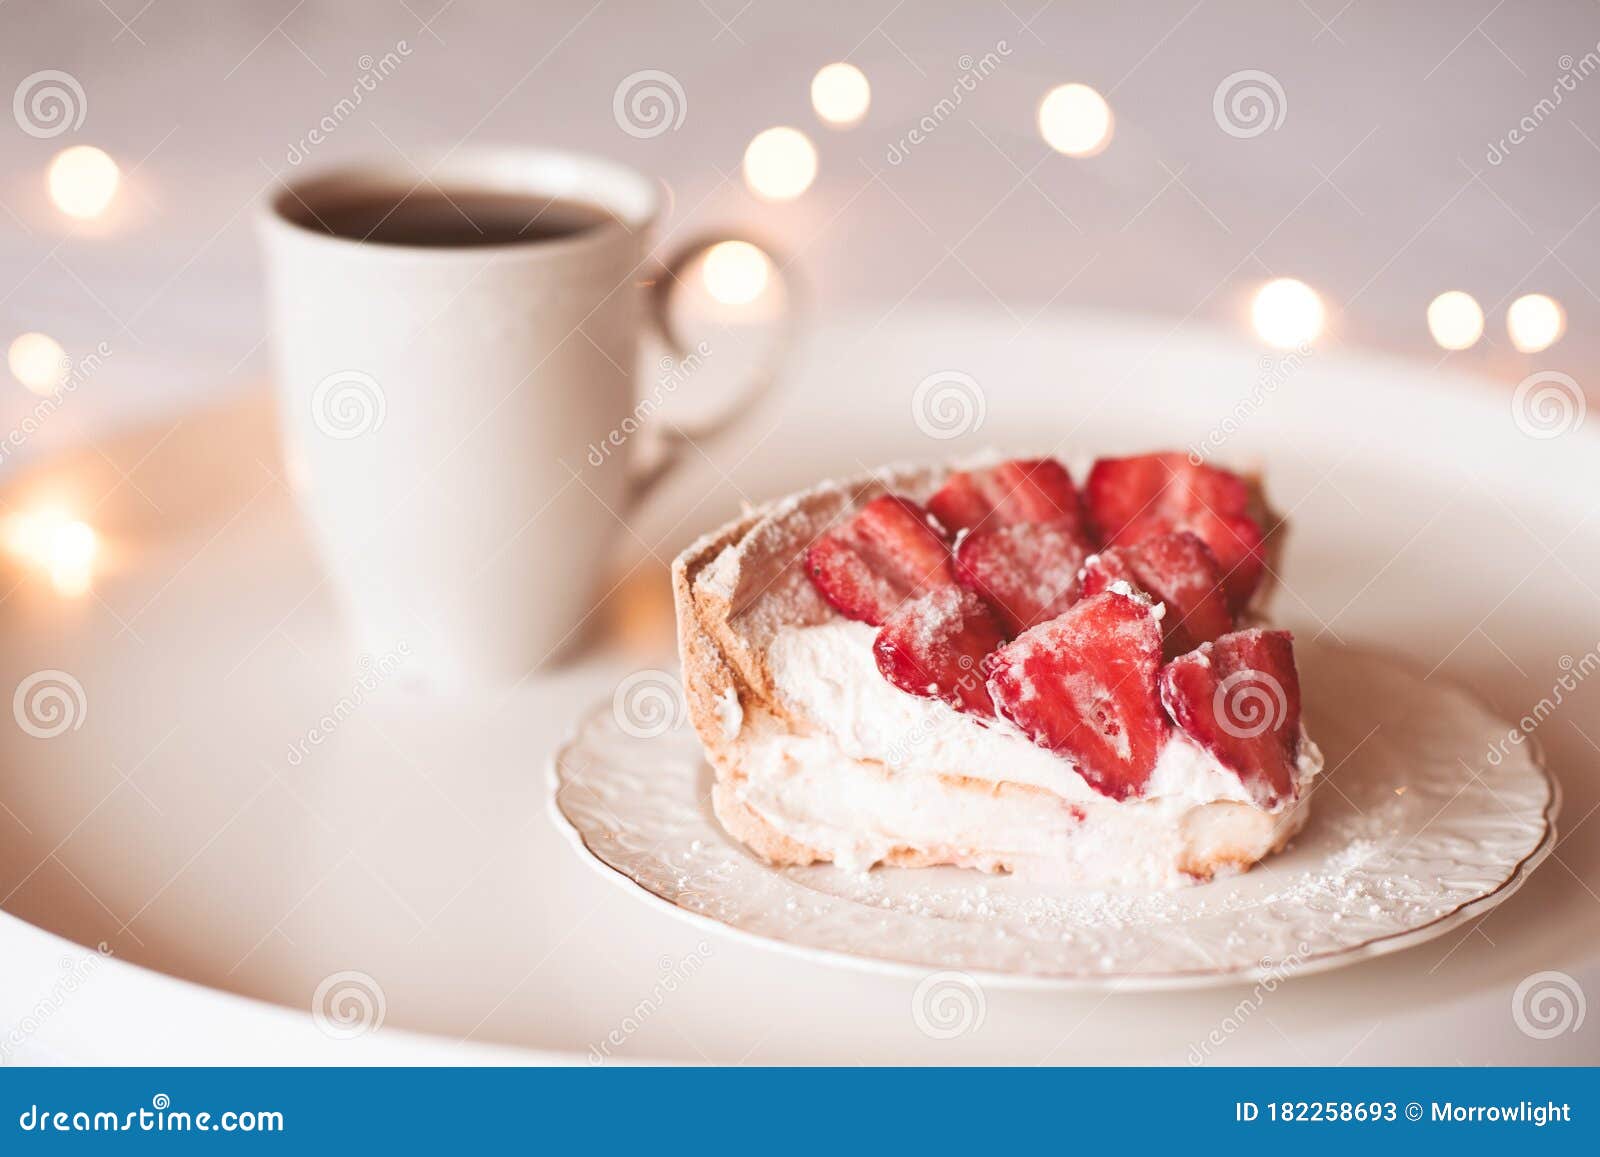 Cup of Tea with Cake Closeup Stock Image - Image of pastry ...